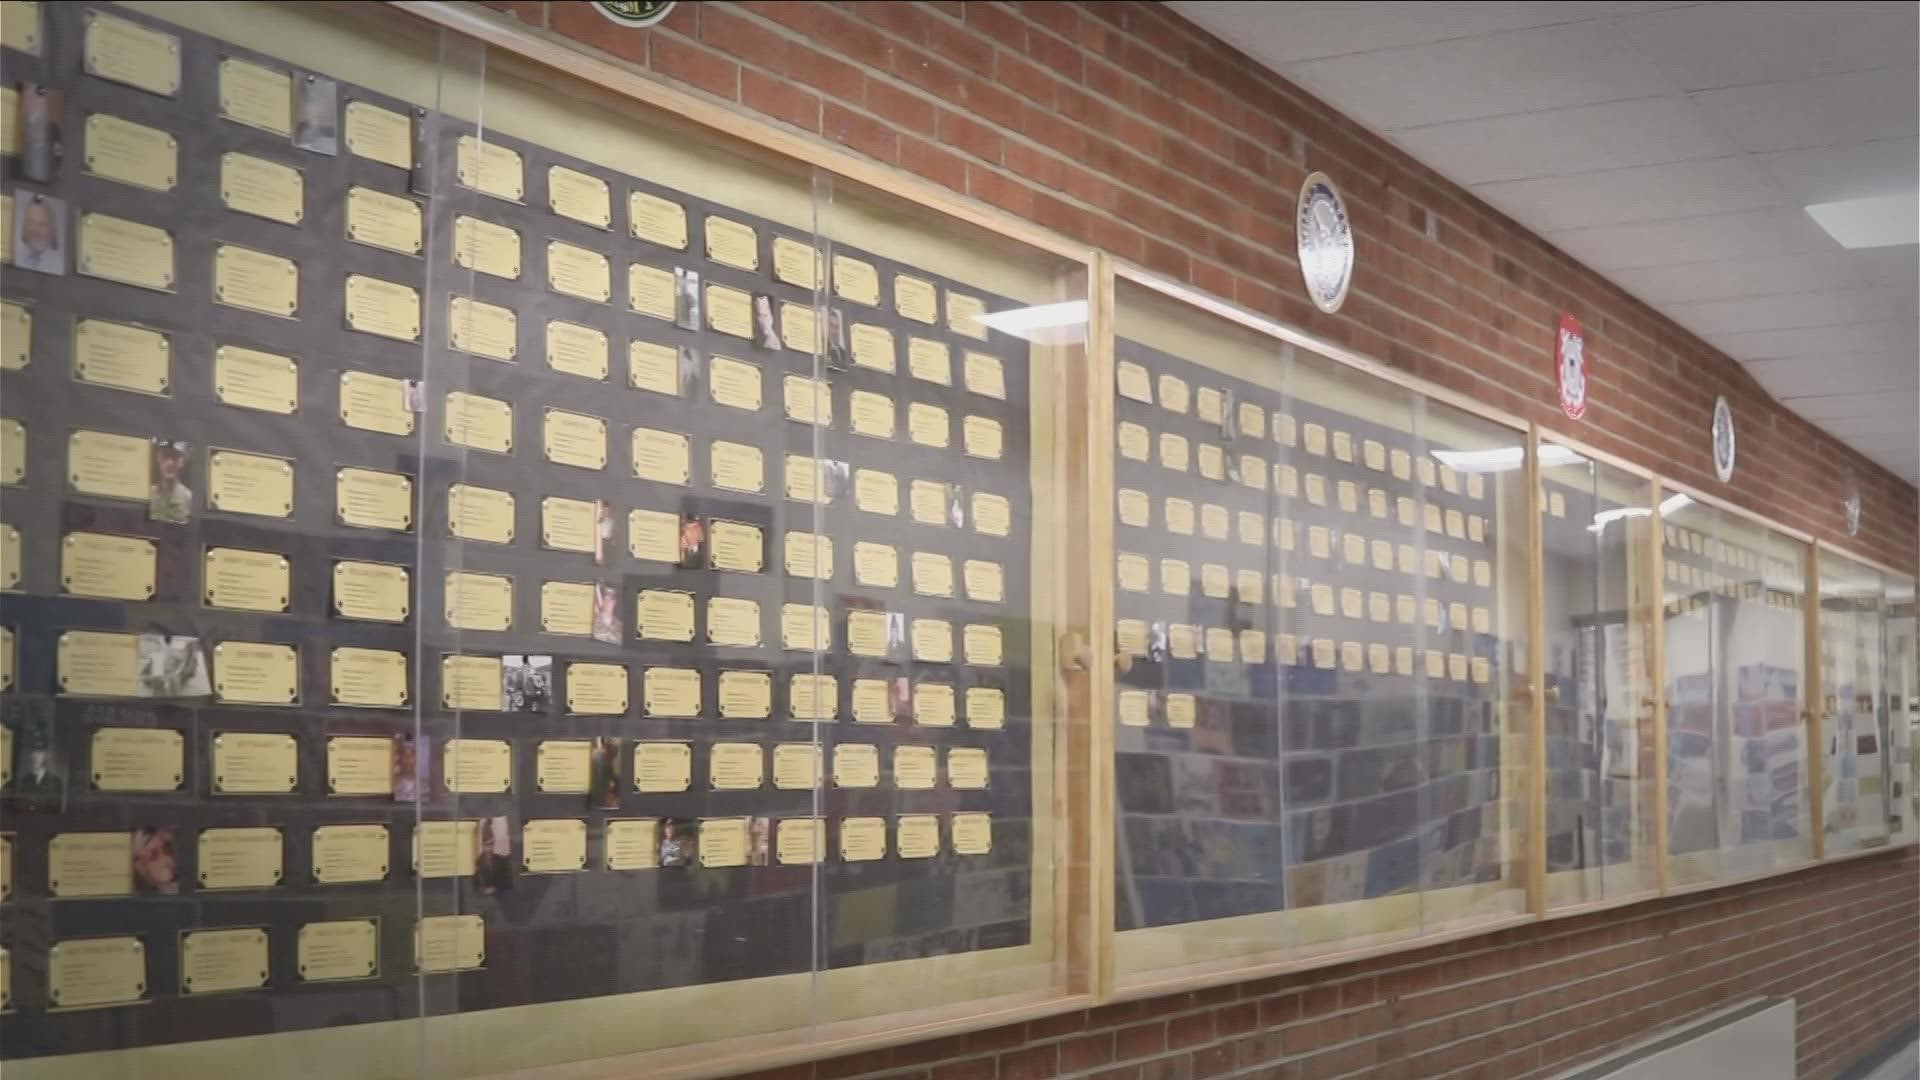 Three students dedicated over 100 hours outside of school to create a wall honoring veterans from Silver Creek.